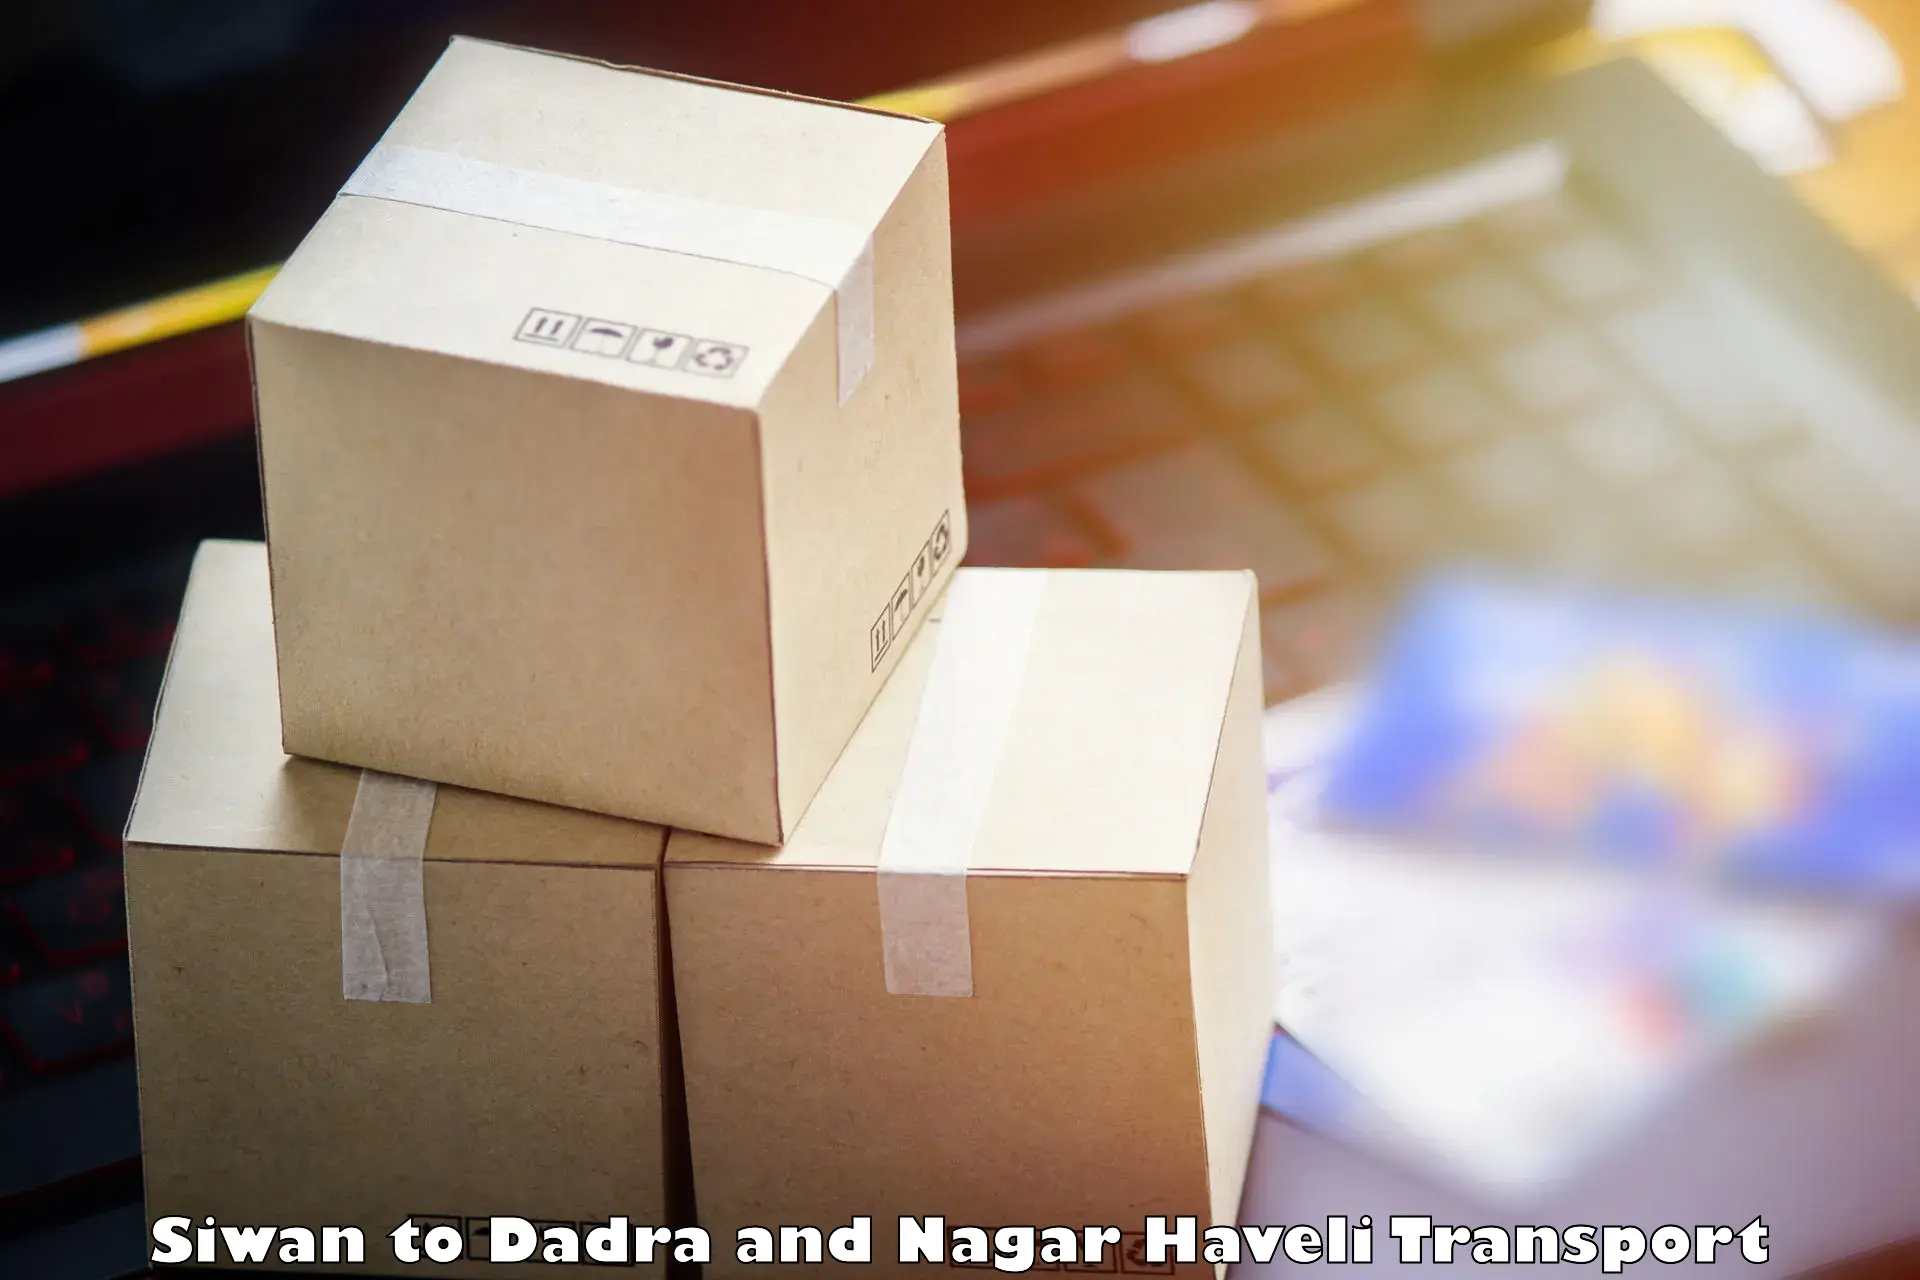 Express transport services in Siwan to Dadra and Nagar Haveli